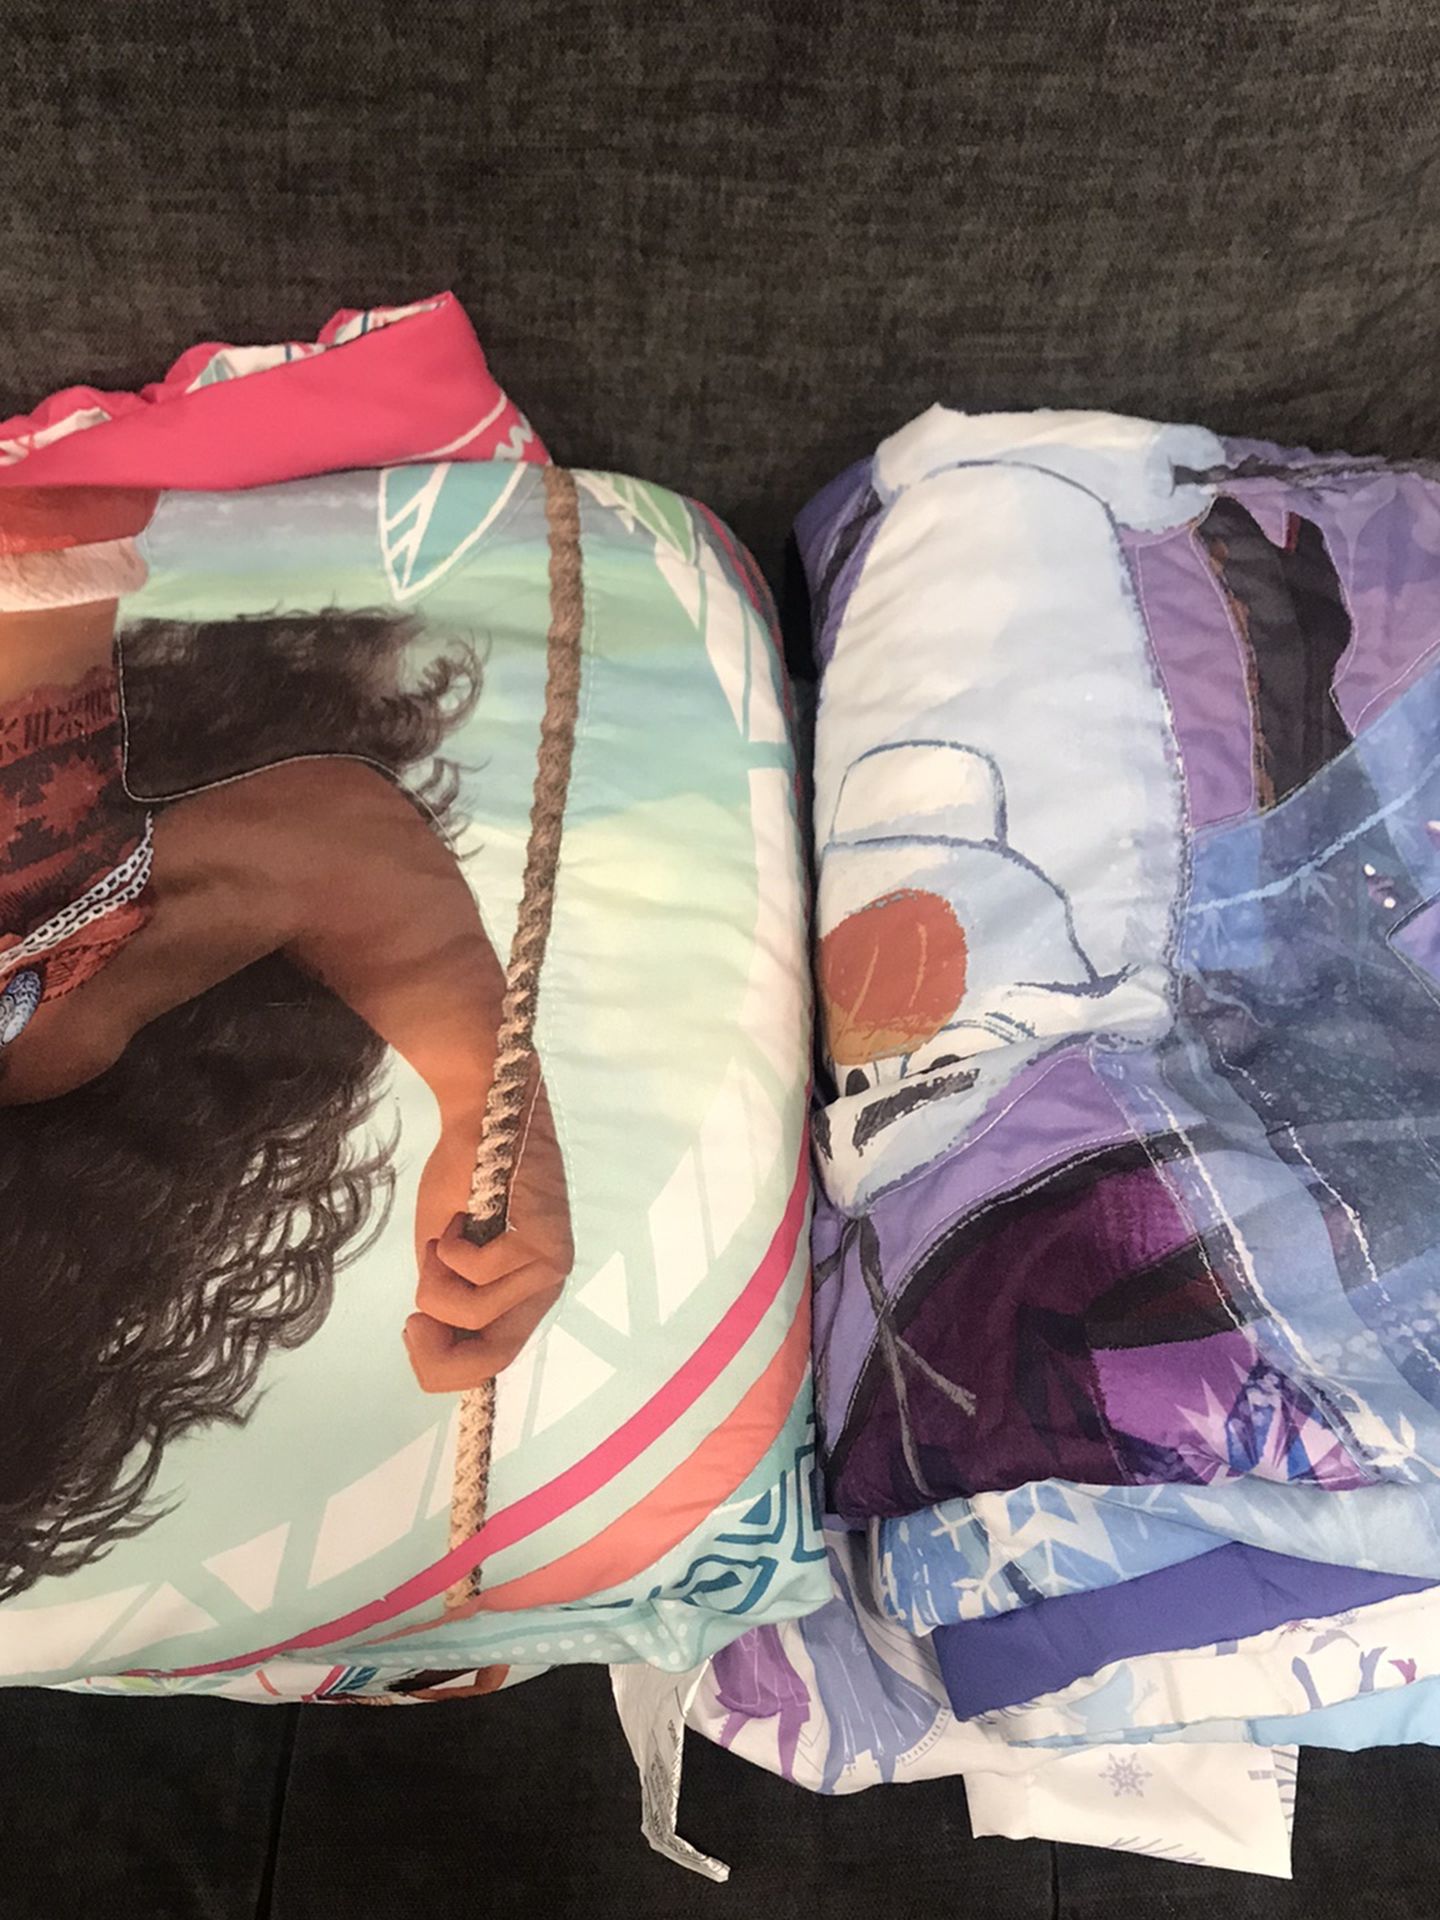 Toddler Size Moana And Frozen Bedding